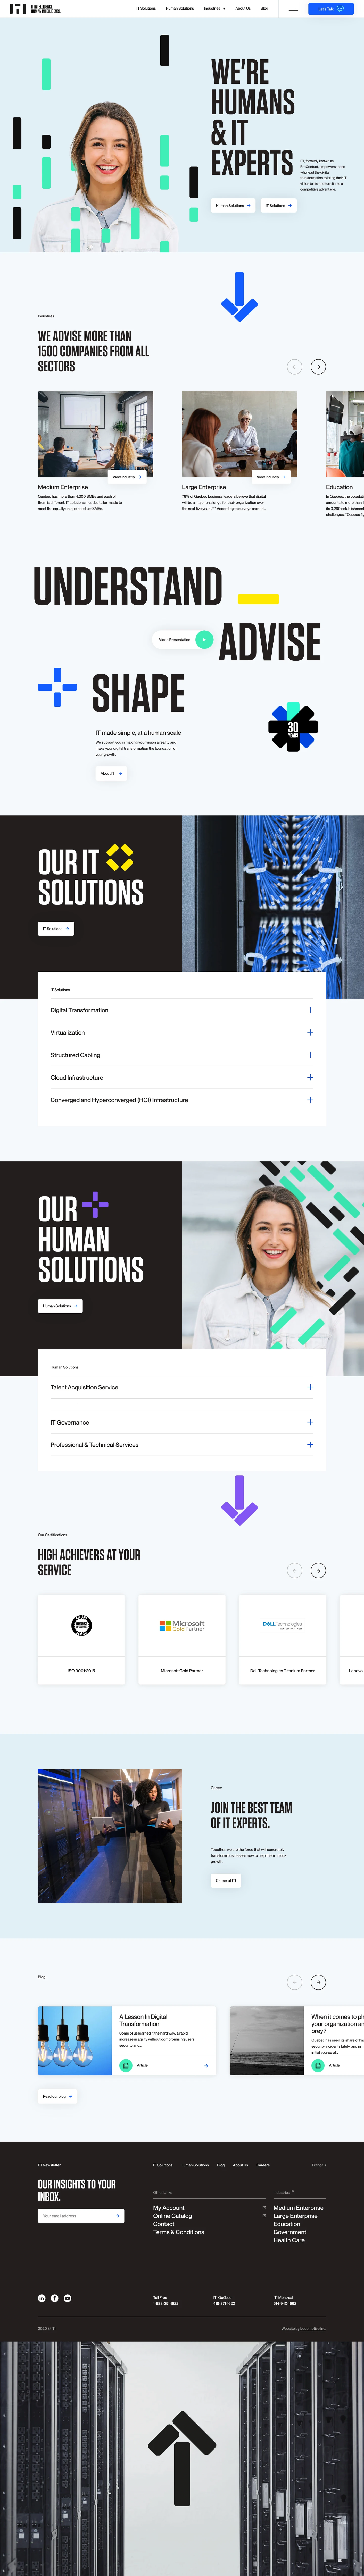 ITI Landing Page Example: ITI offers technology services and solutions ranging from IT strategic consulting to implementation within organizations.